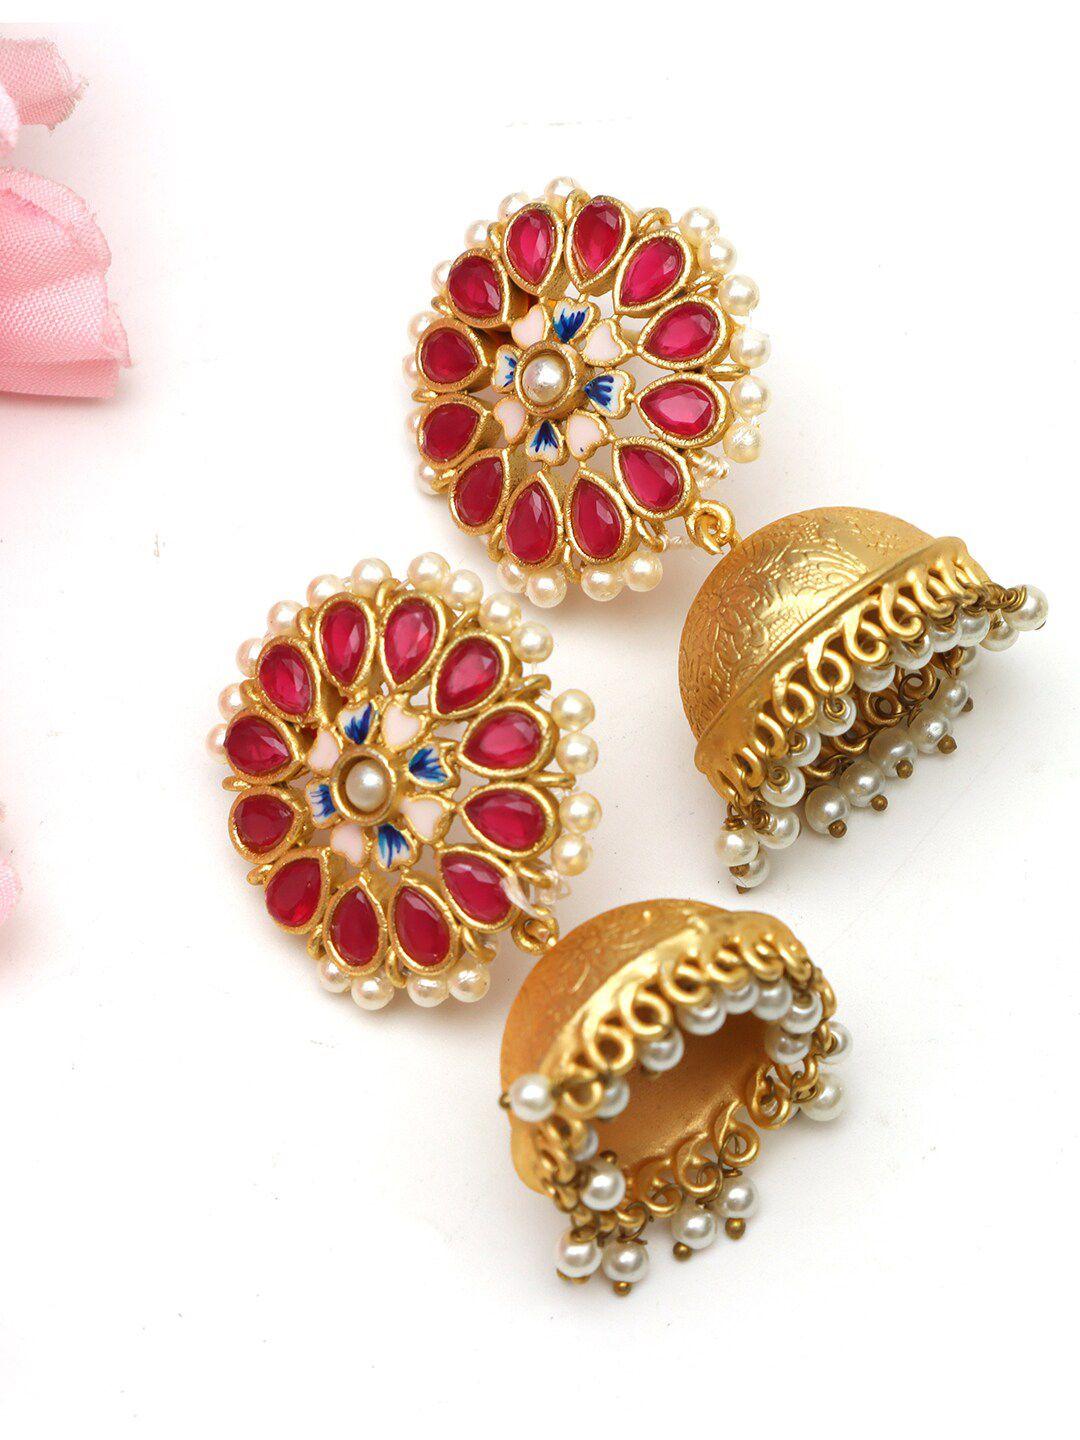 ozanoo gold-plated floral jhumkas earrings